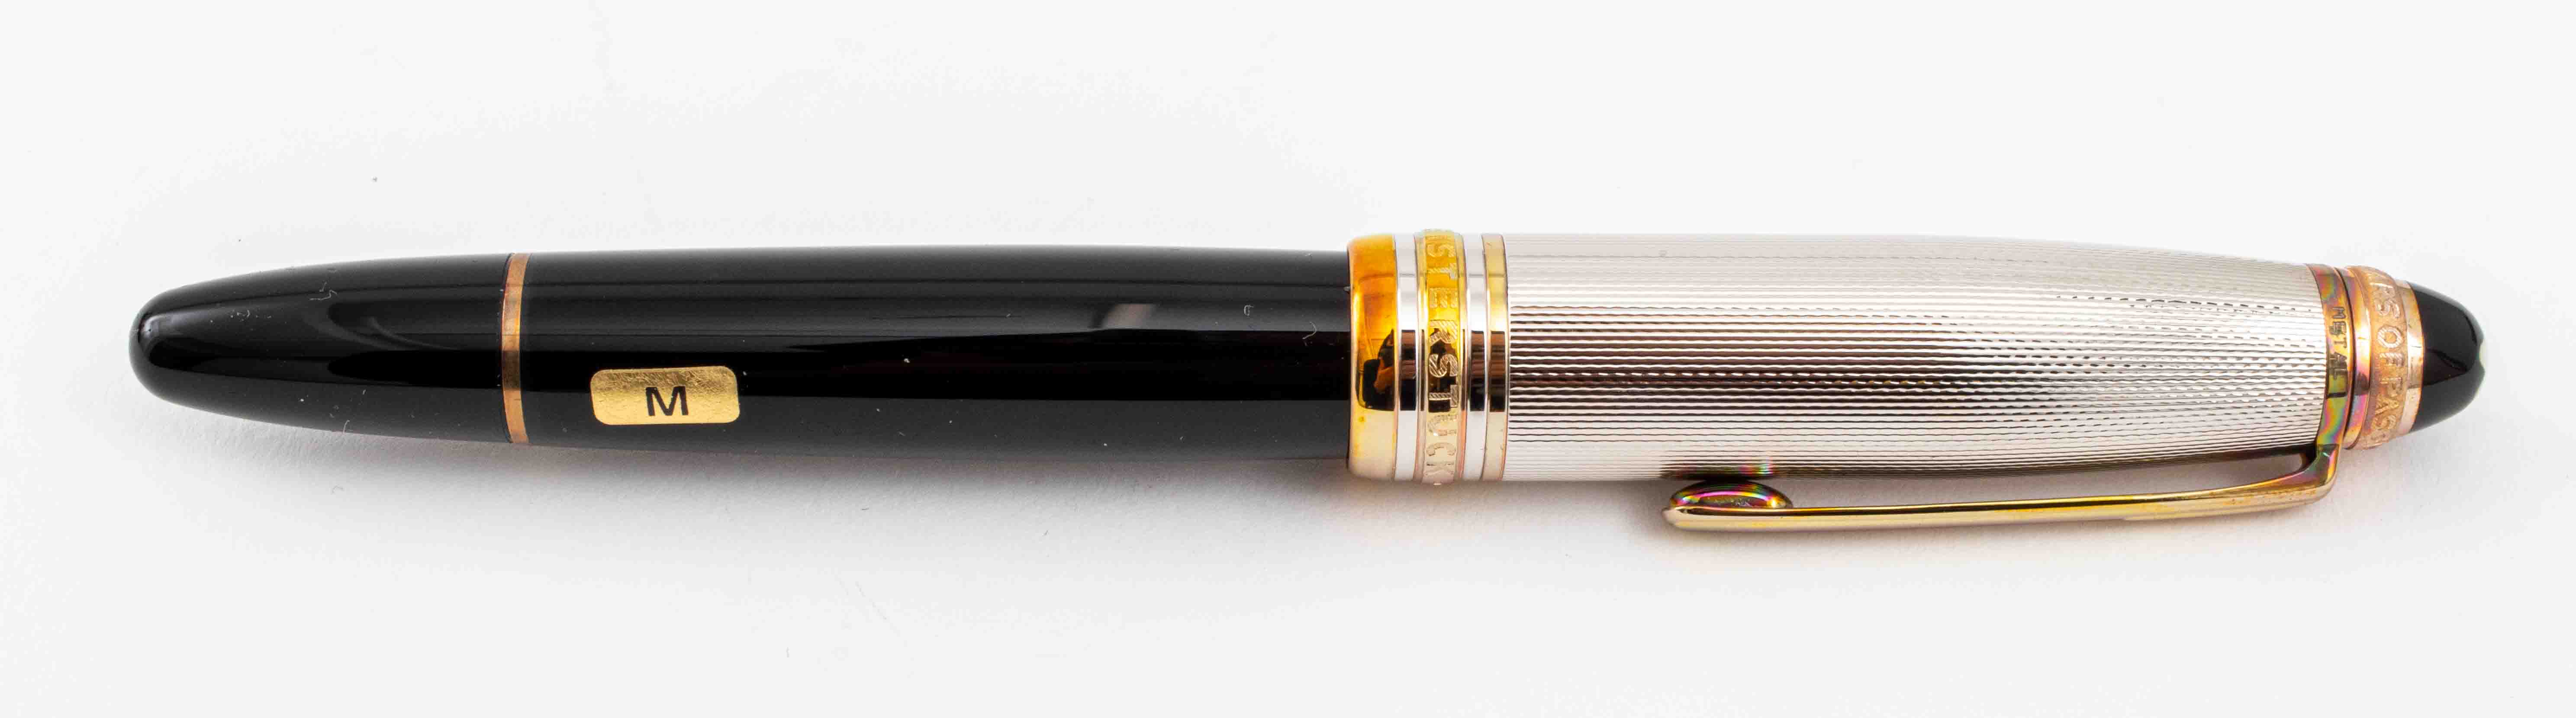 MONTBLANC MEISTERSTUCK 1924 EDITION 2bc75a